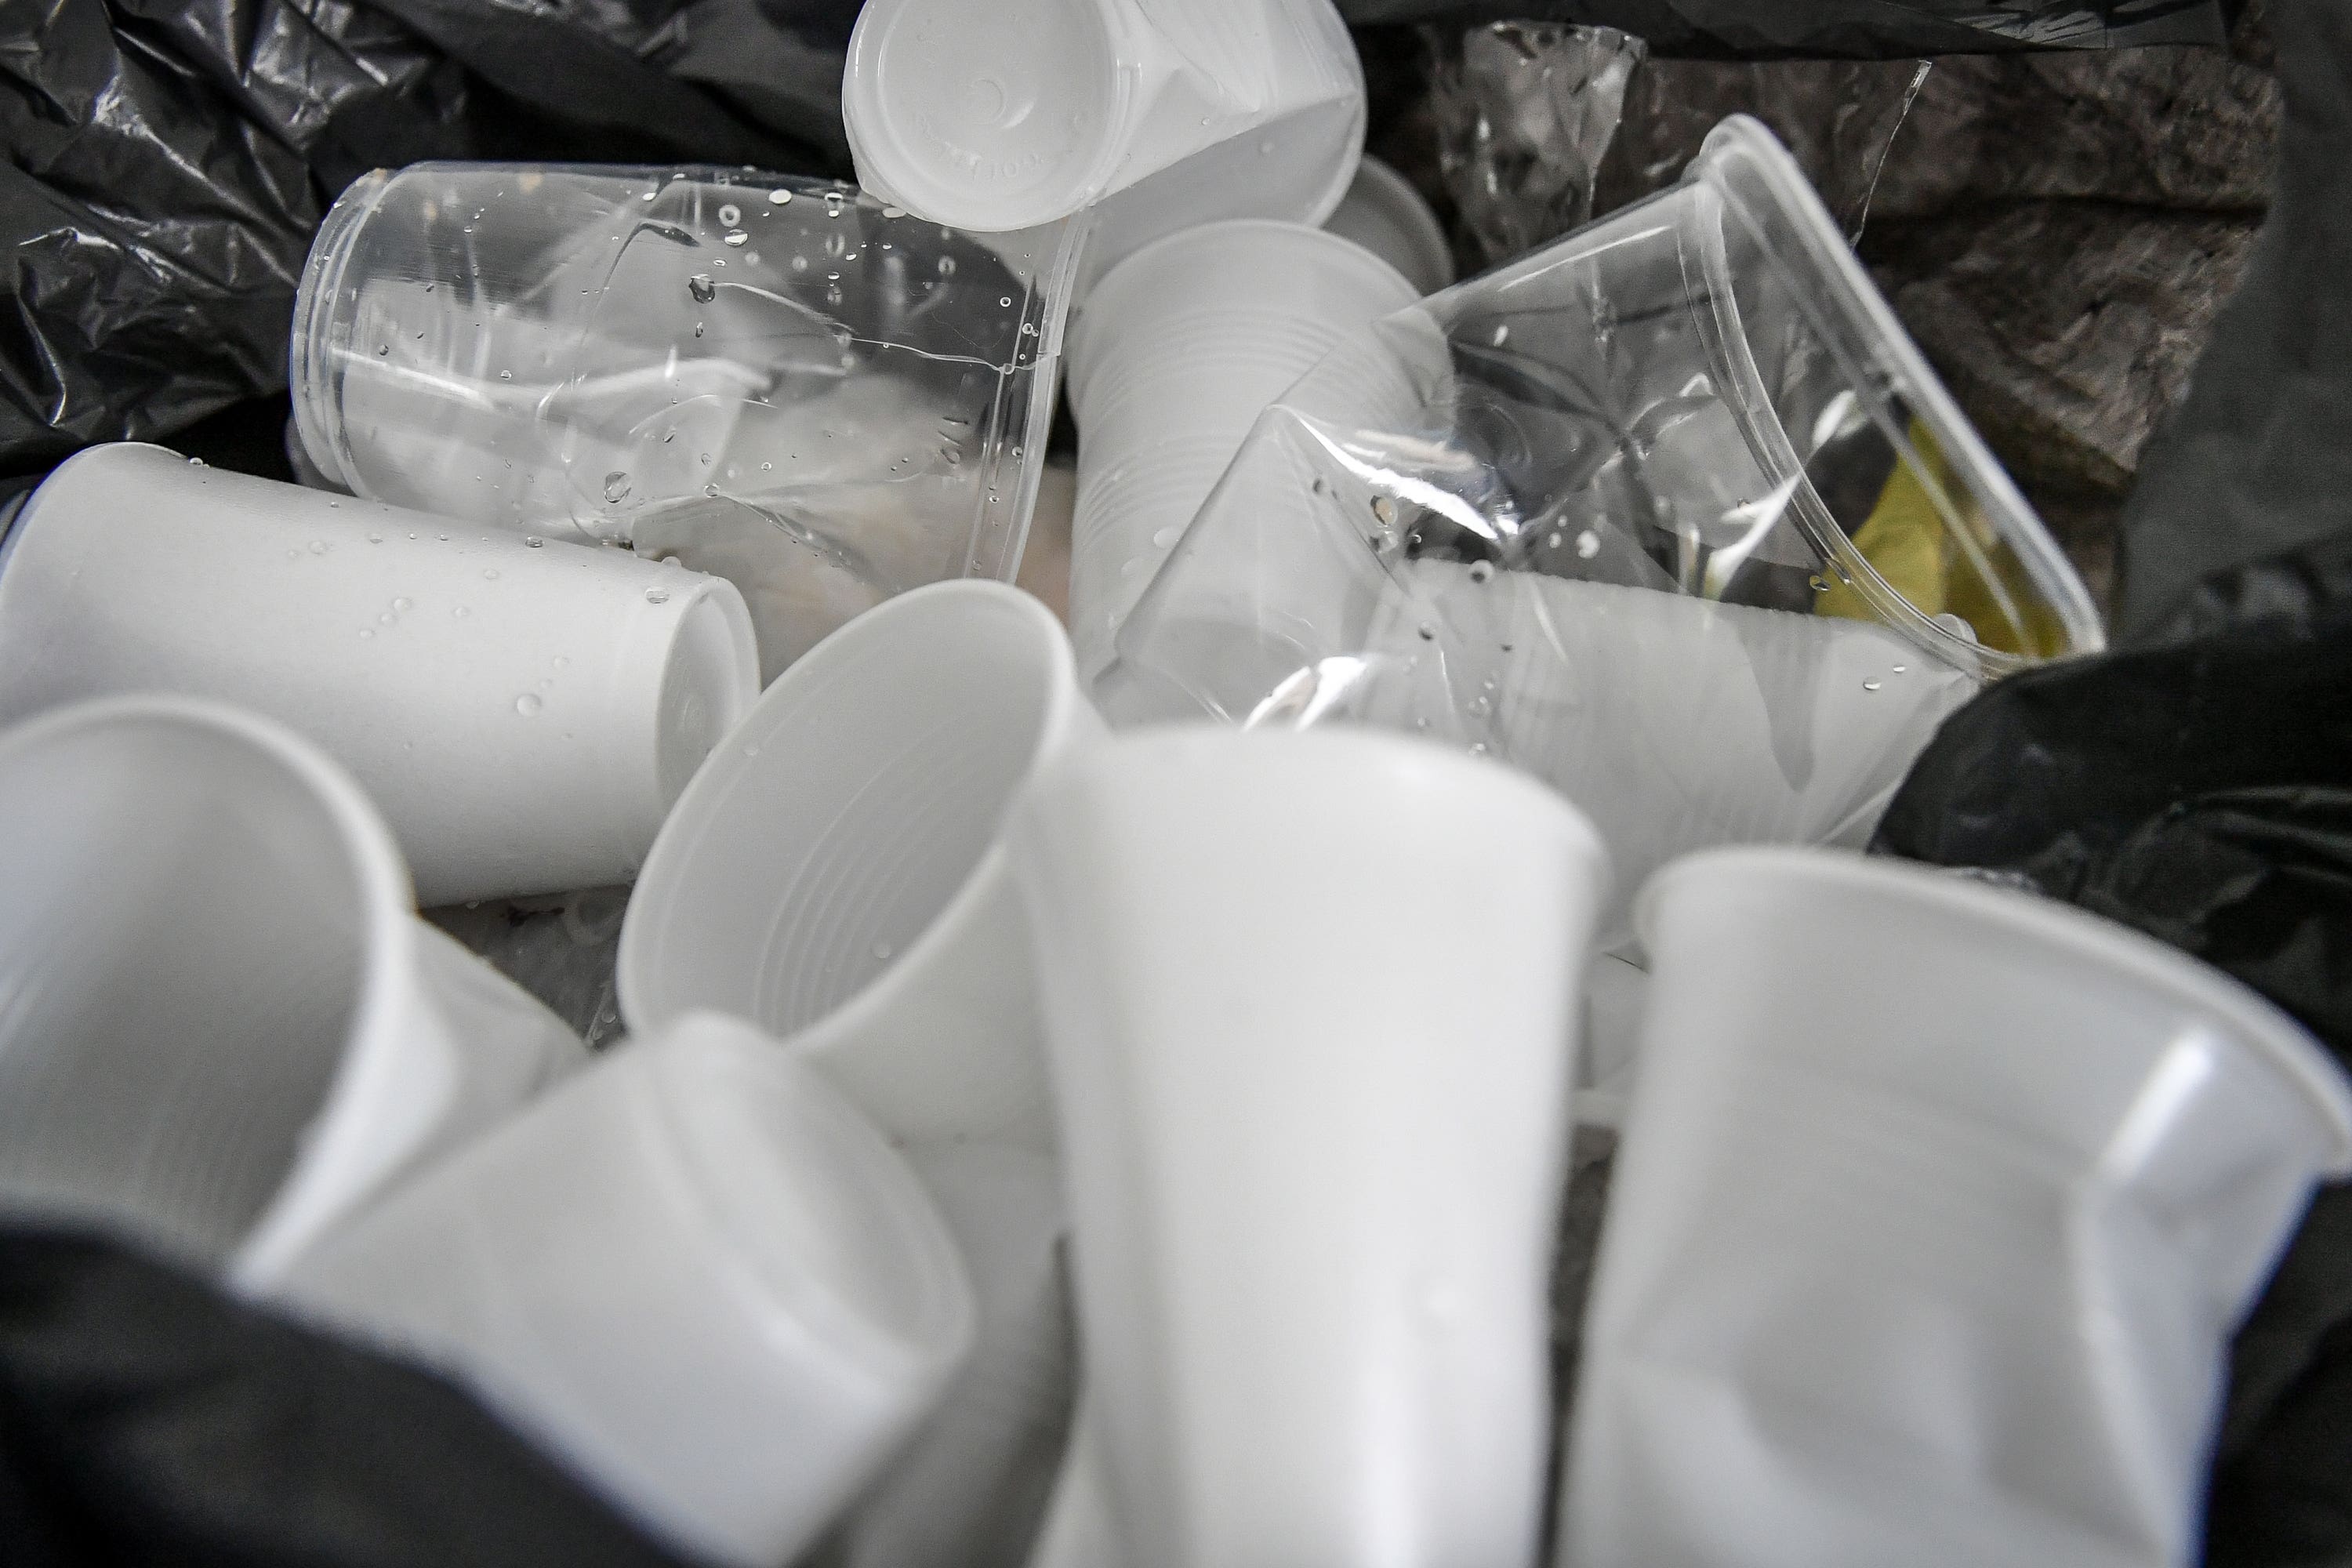 Single-use plastic ban comes into force in Wales